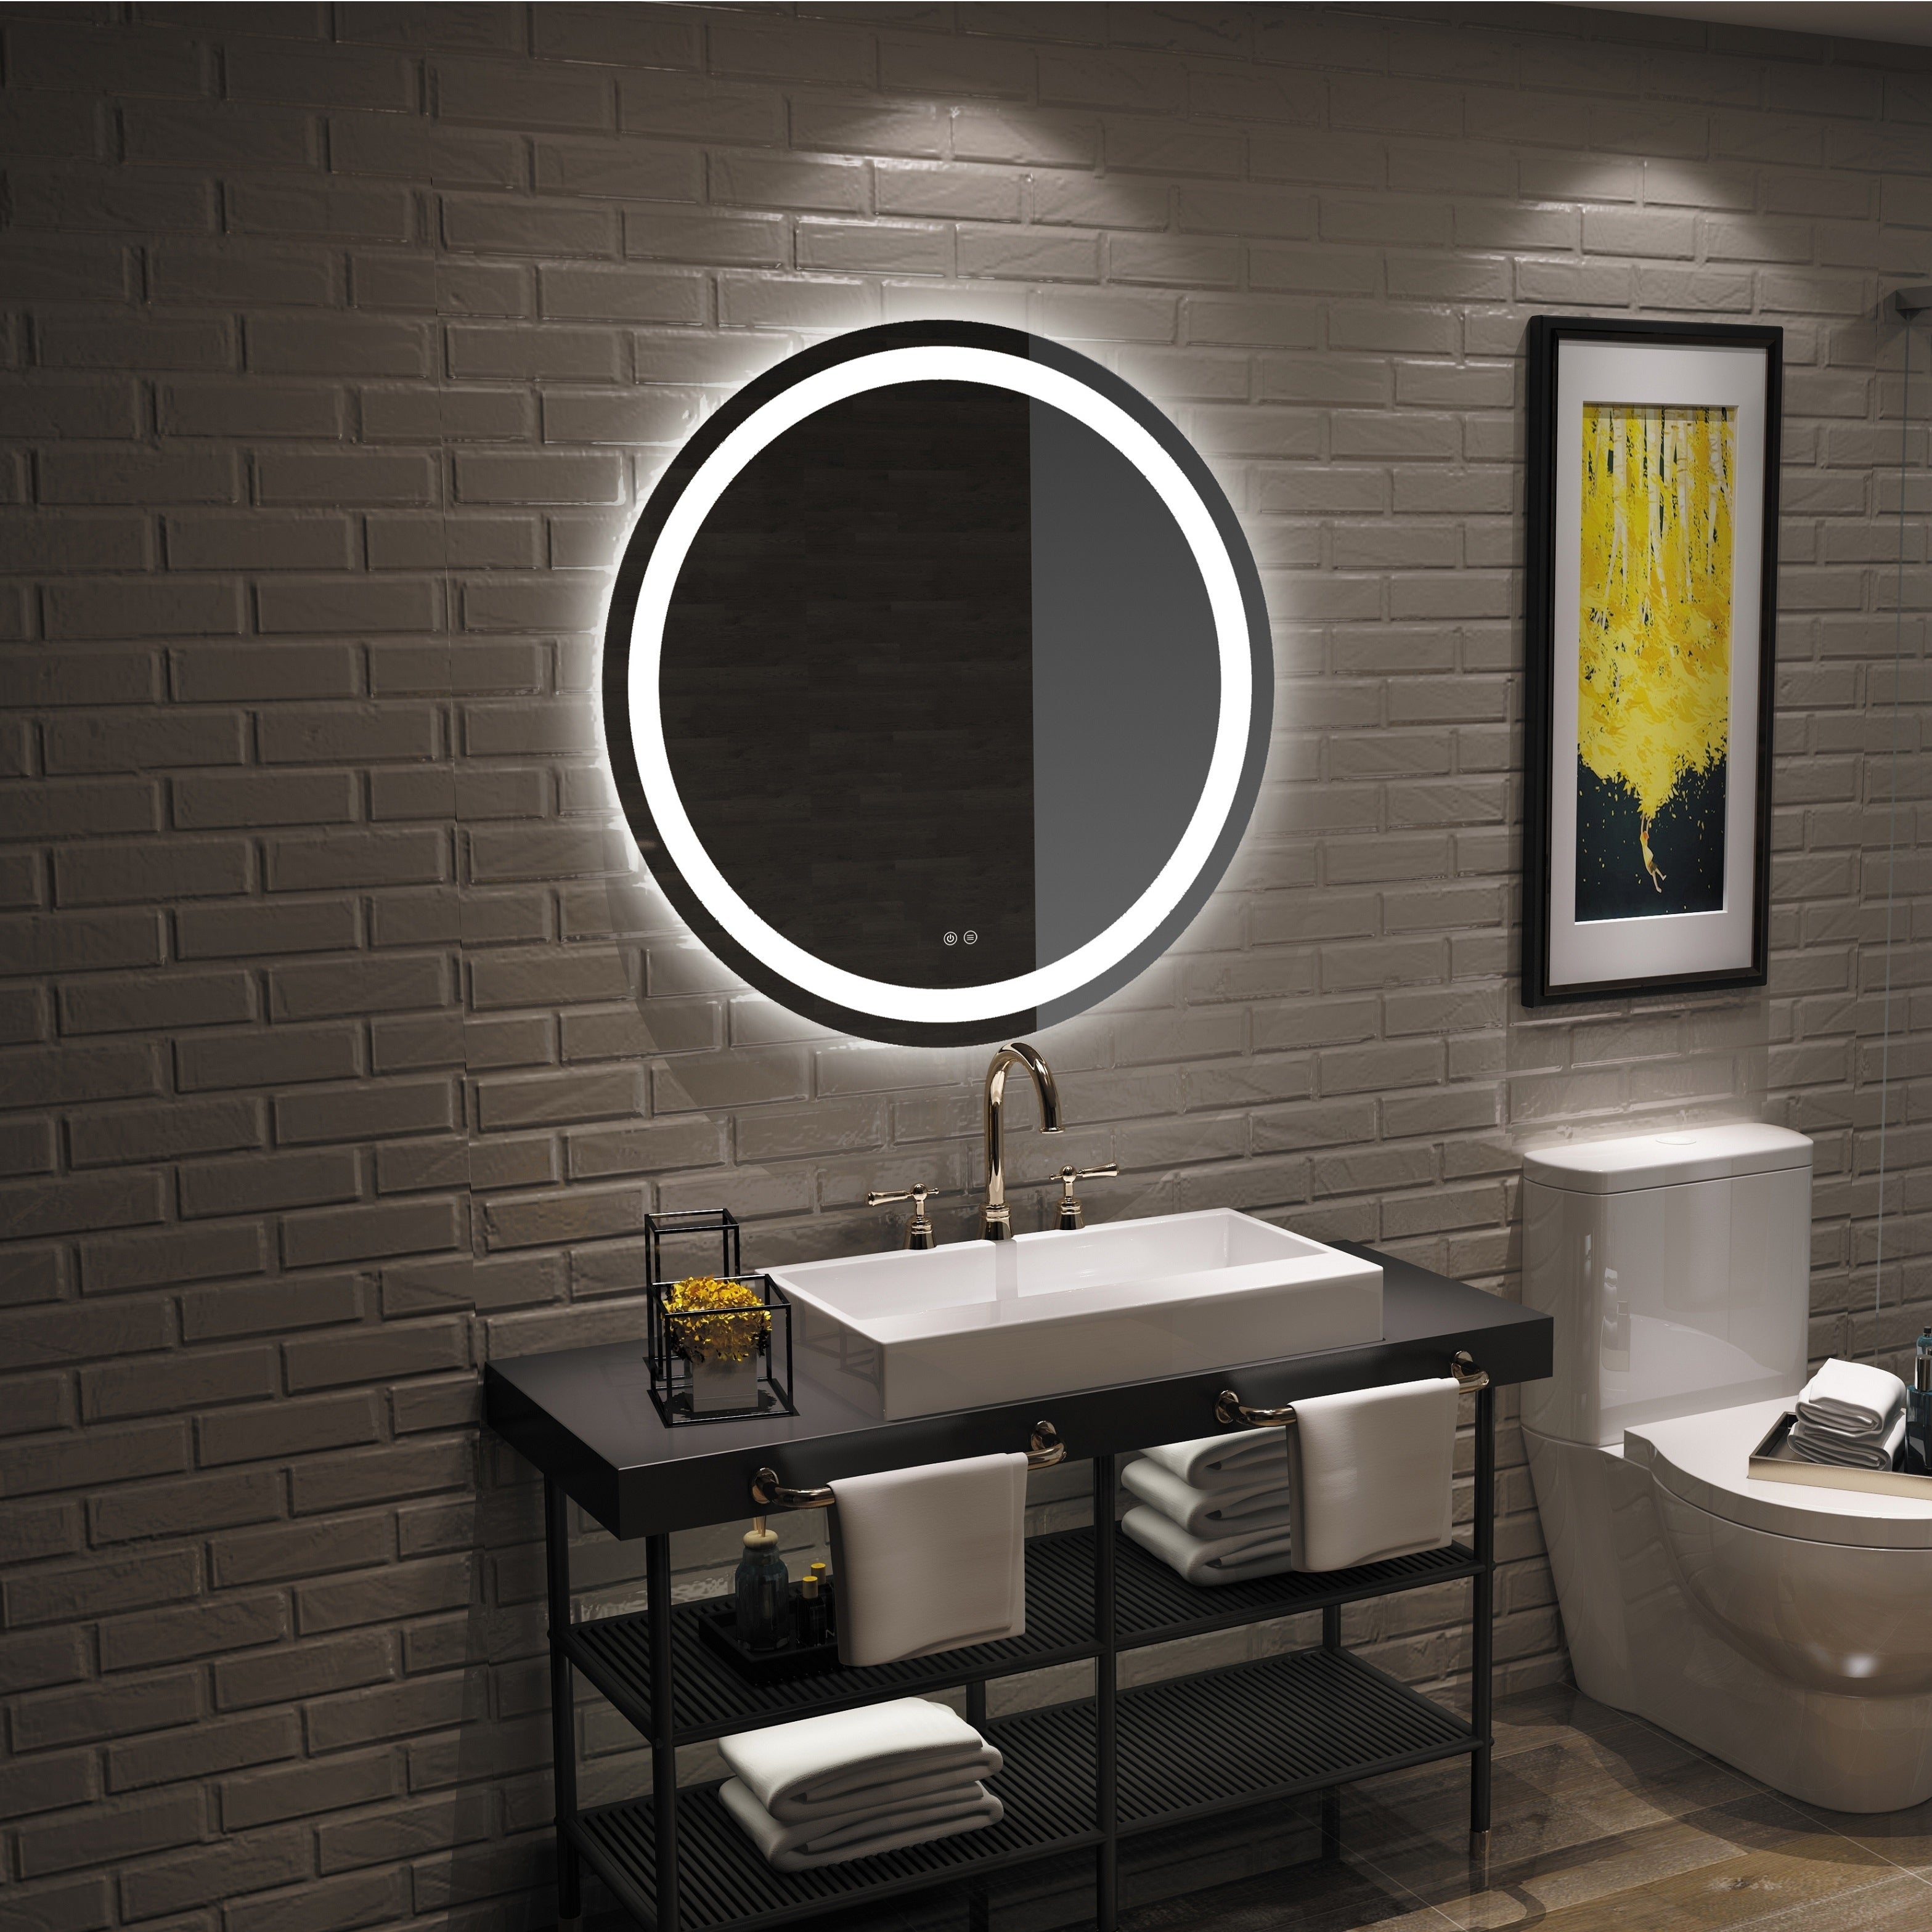 Living room bathroom wall mounted led mirror from WINER M&G